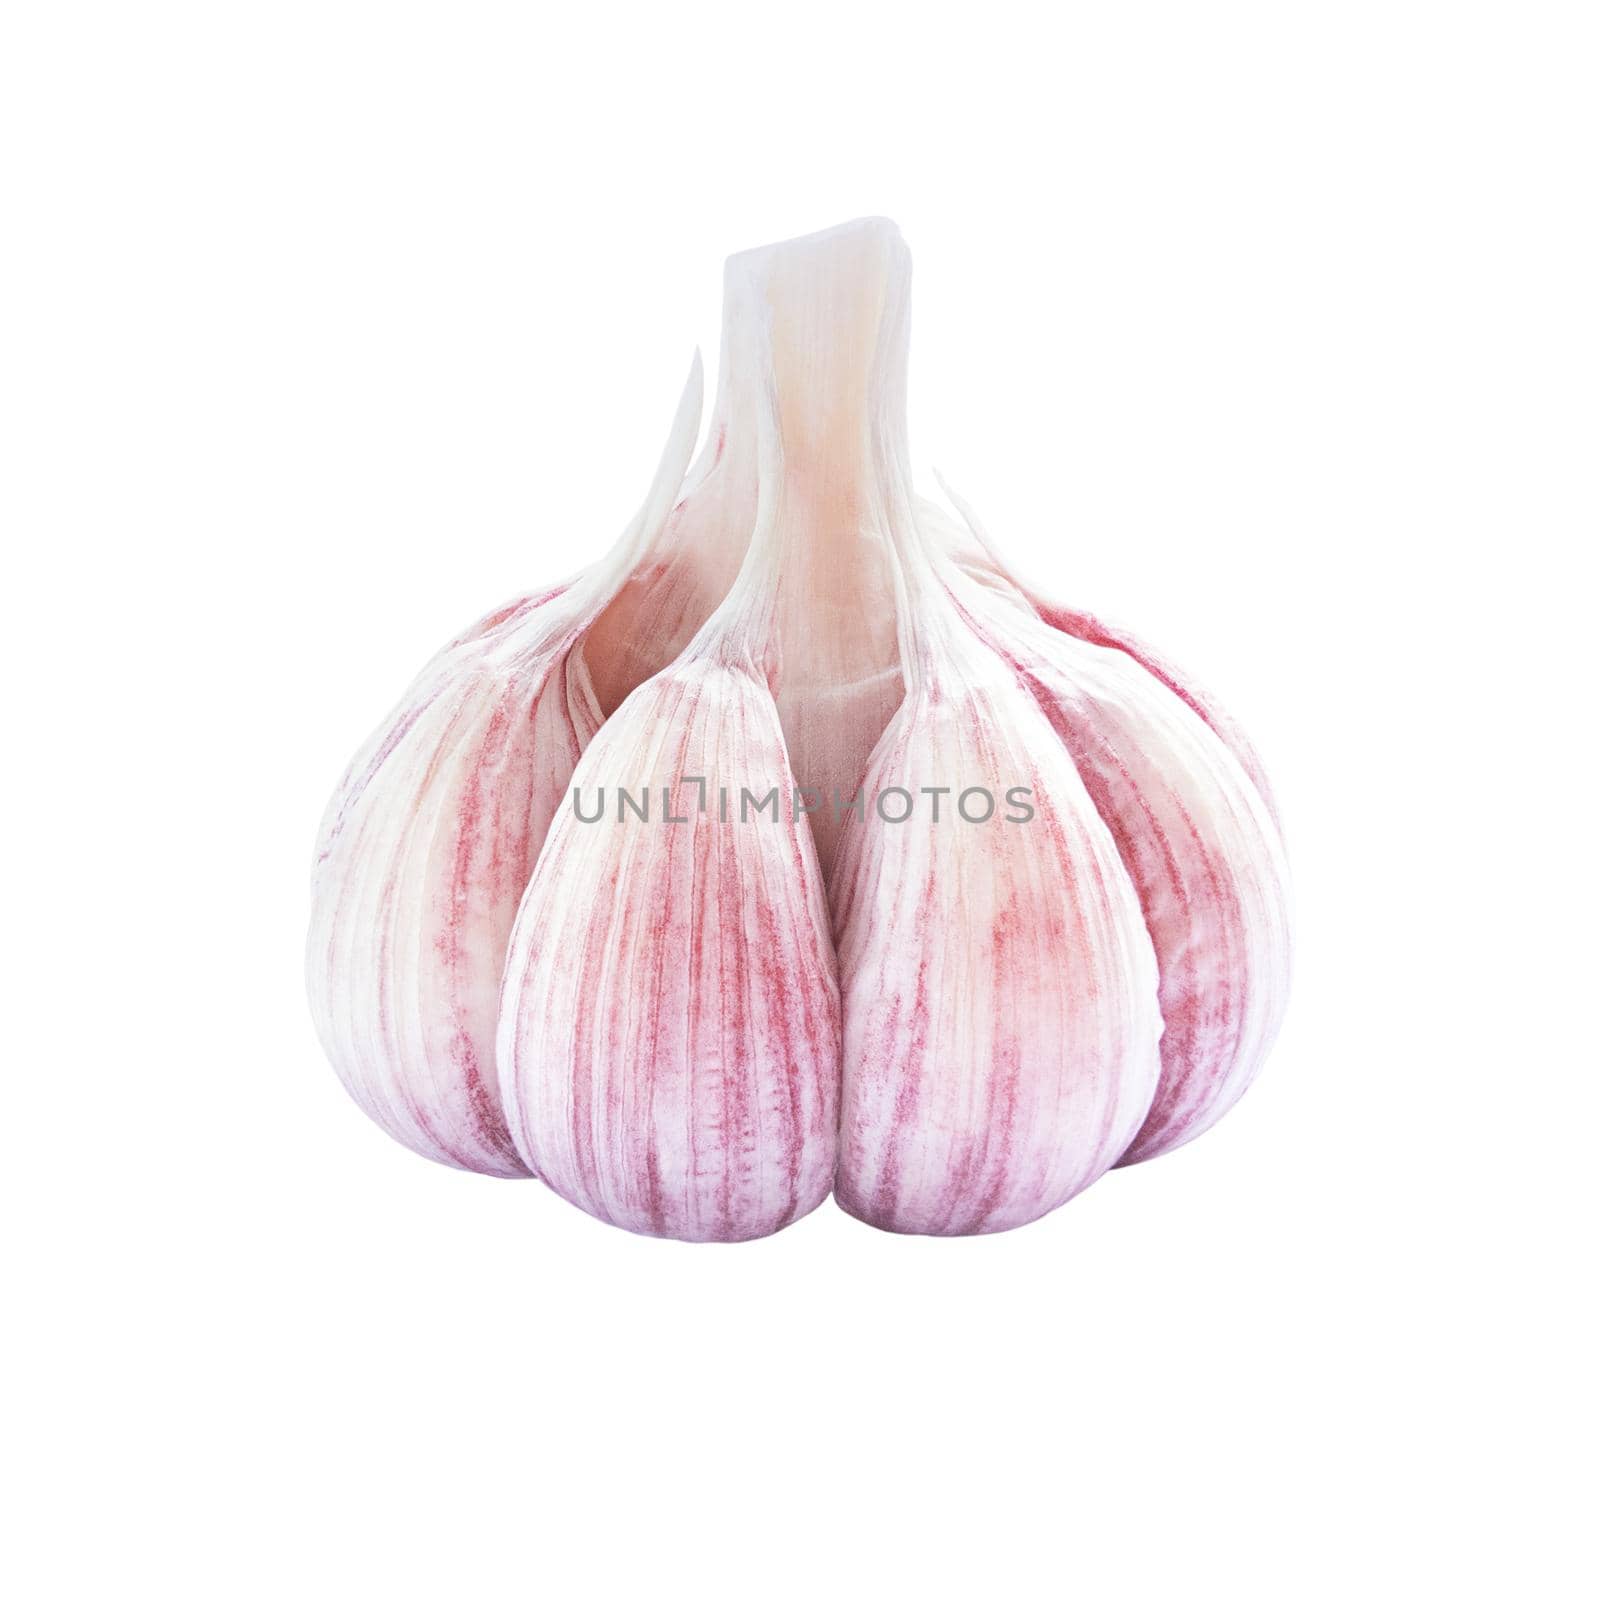 Garlic raw vegetable isolated on a white background.